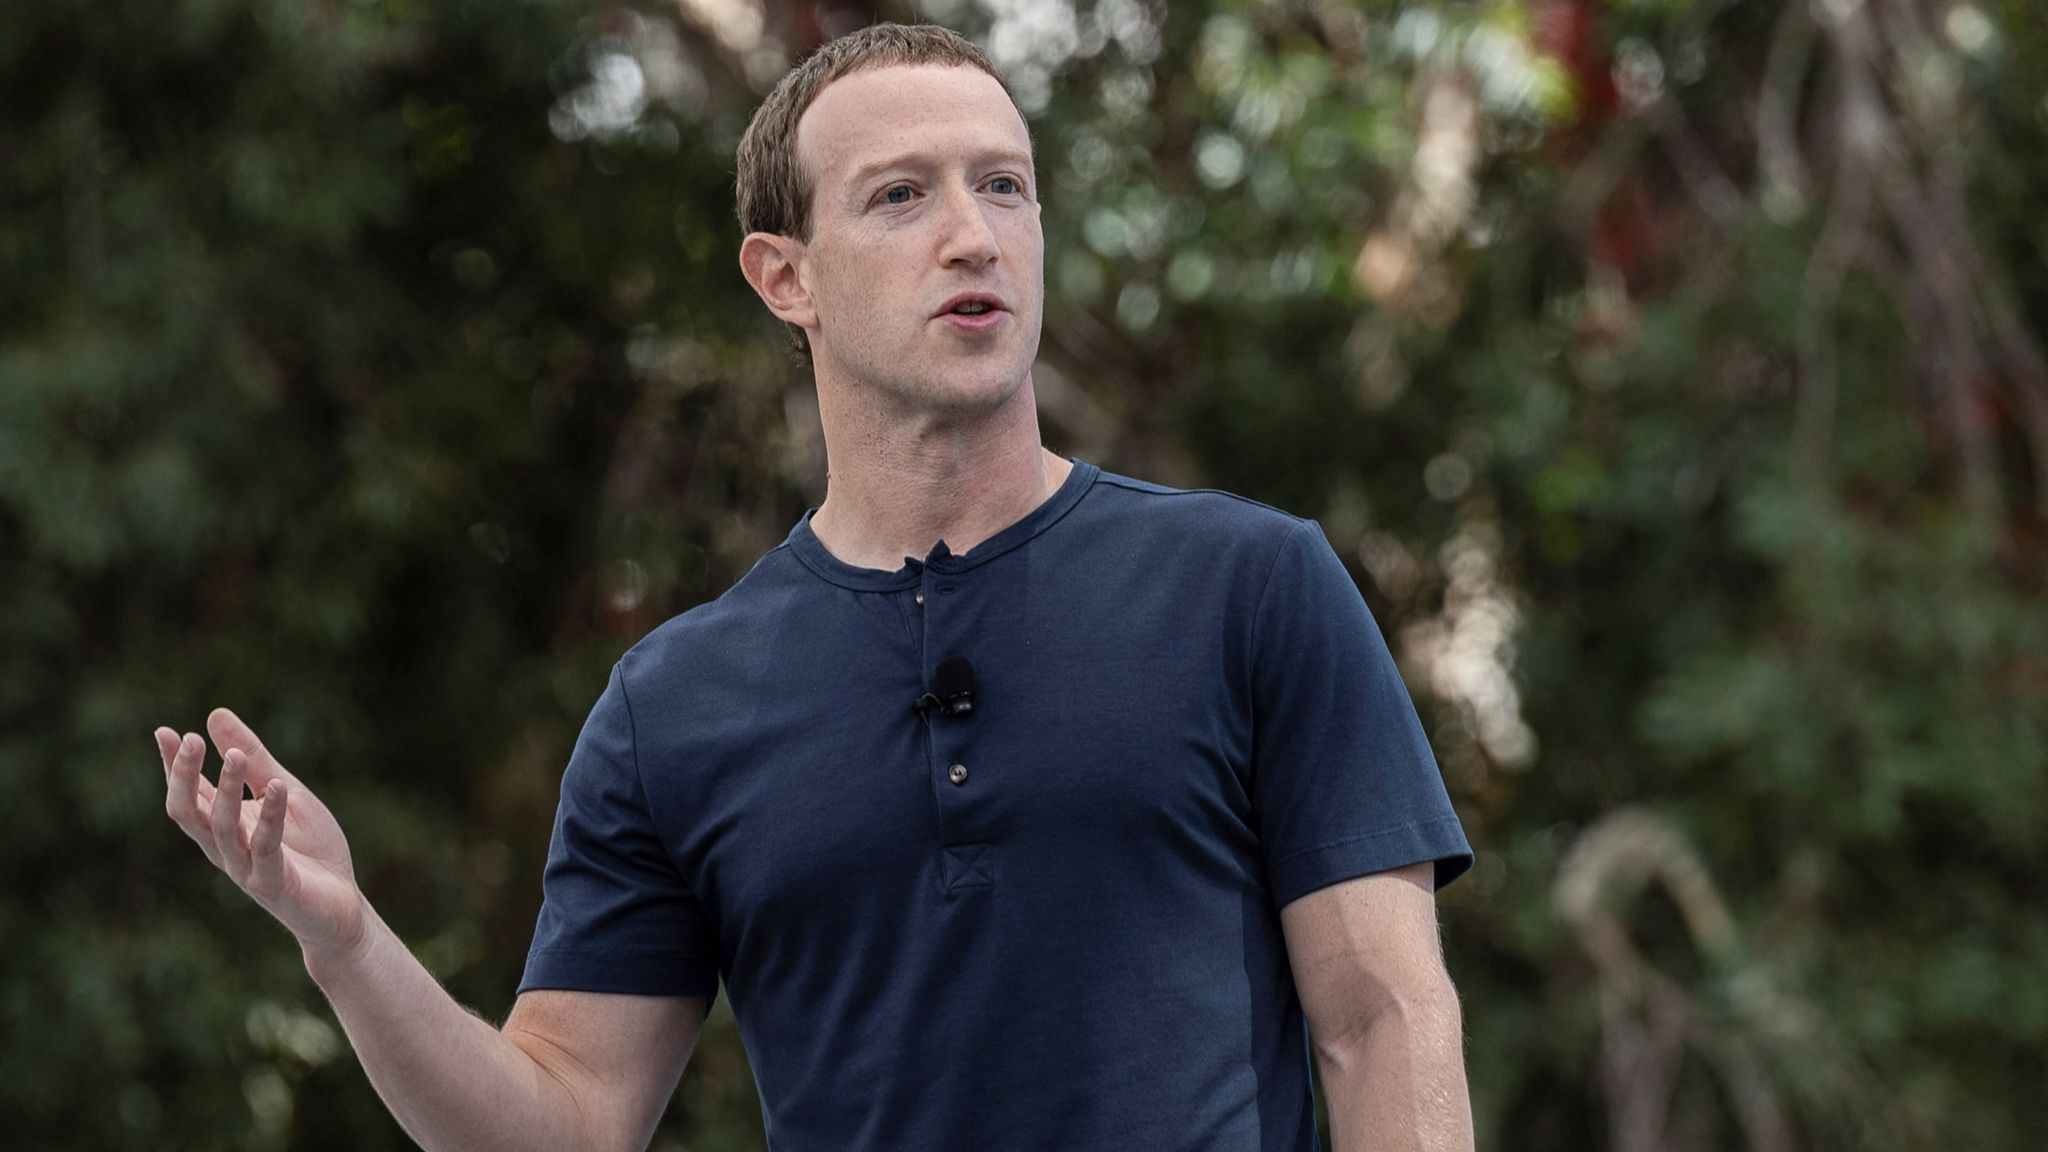 Facebook founder Mark Zuckerberg reveals his latest project on Facebook and Instagram